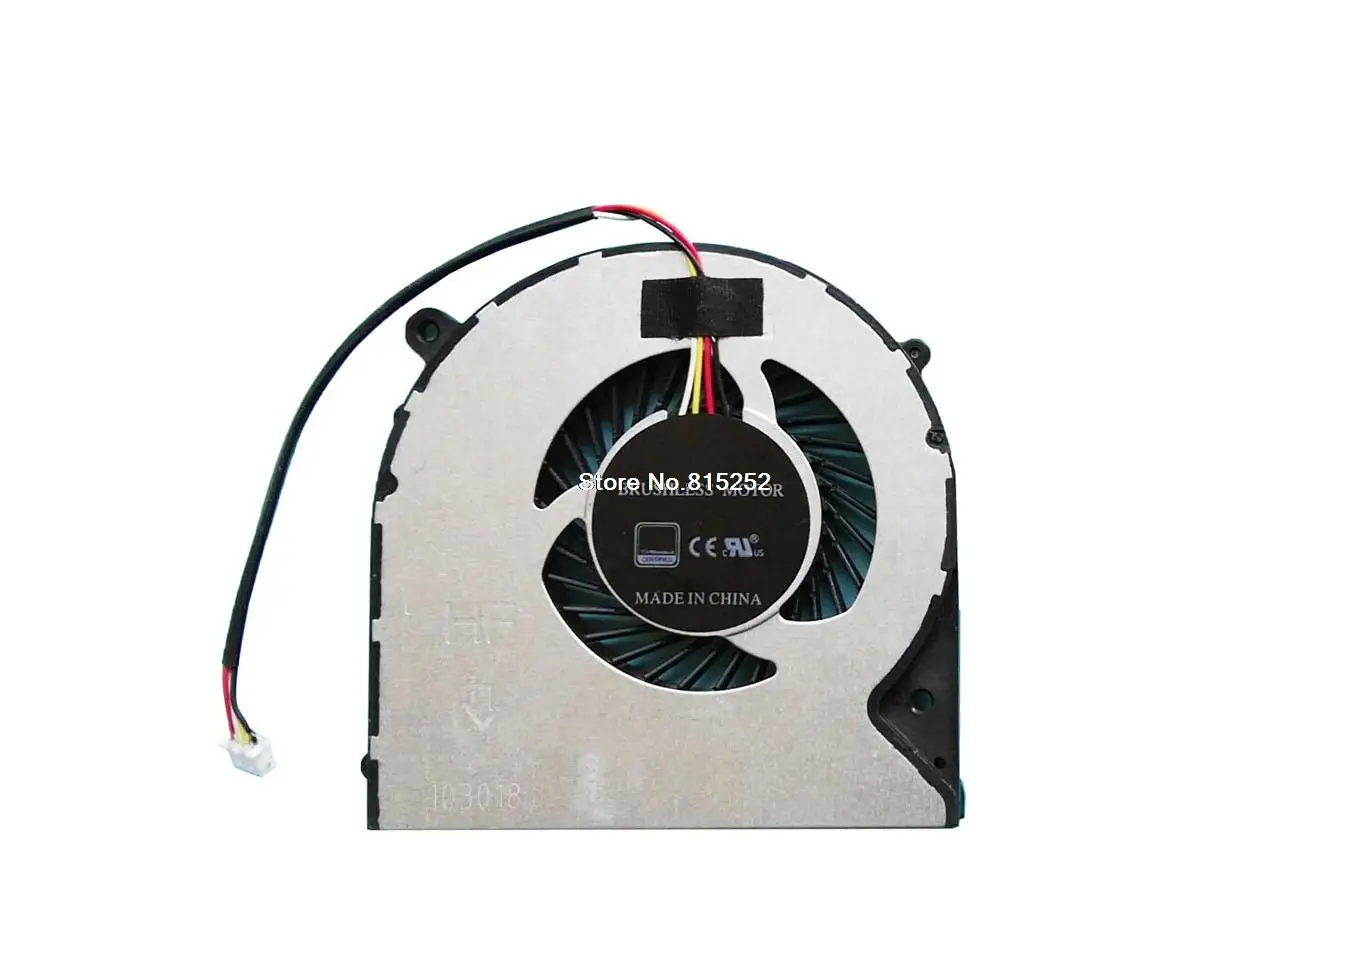 

Laptop CPU FAN For Exone go business 1540 II DC5V 0.5A